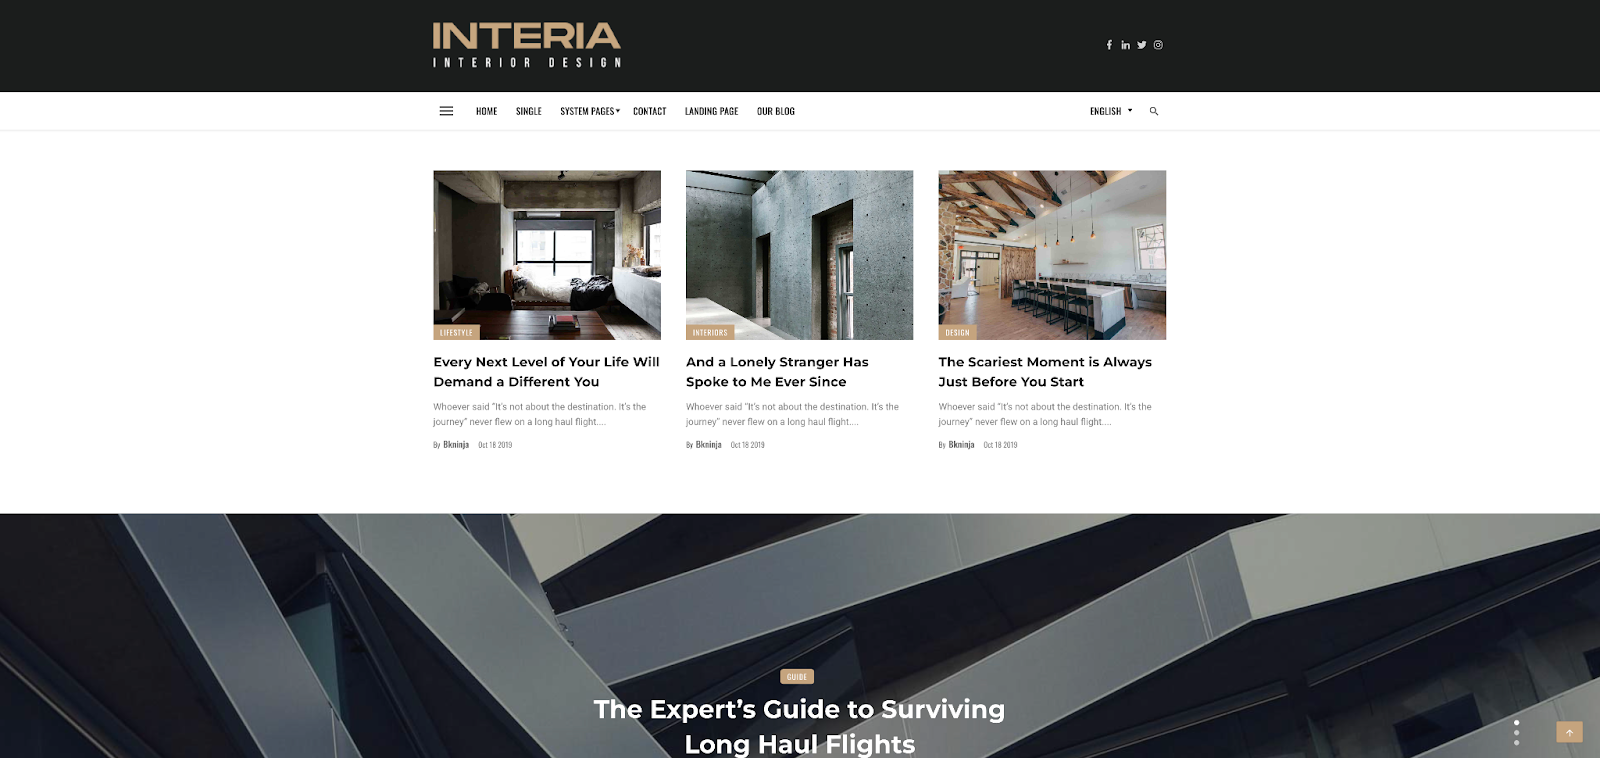 Inertia will give your next blog momentum when you use this customizable HubSpot blog template